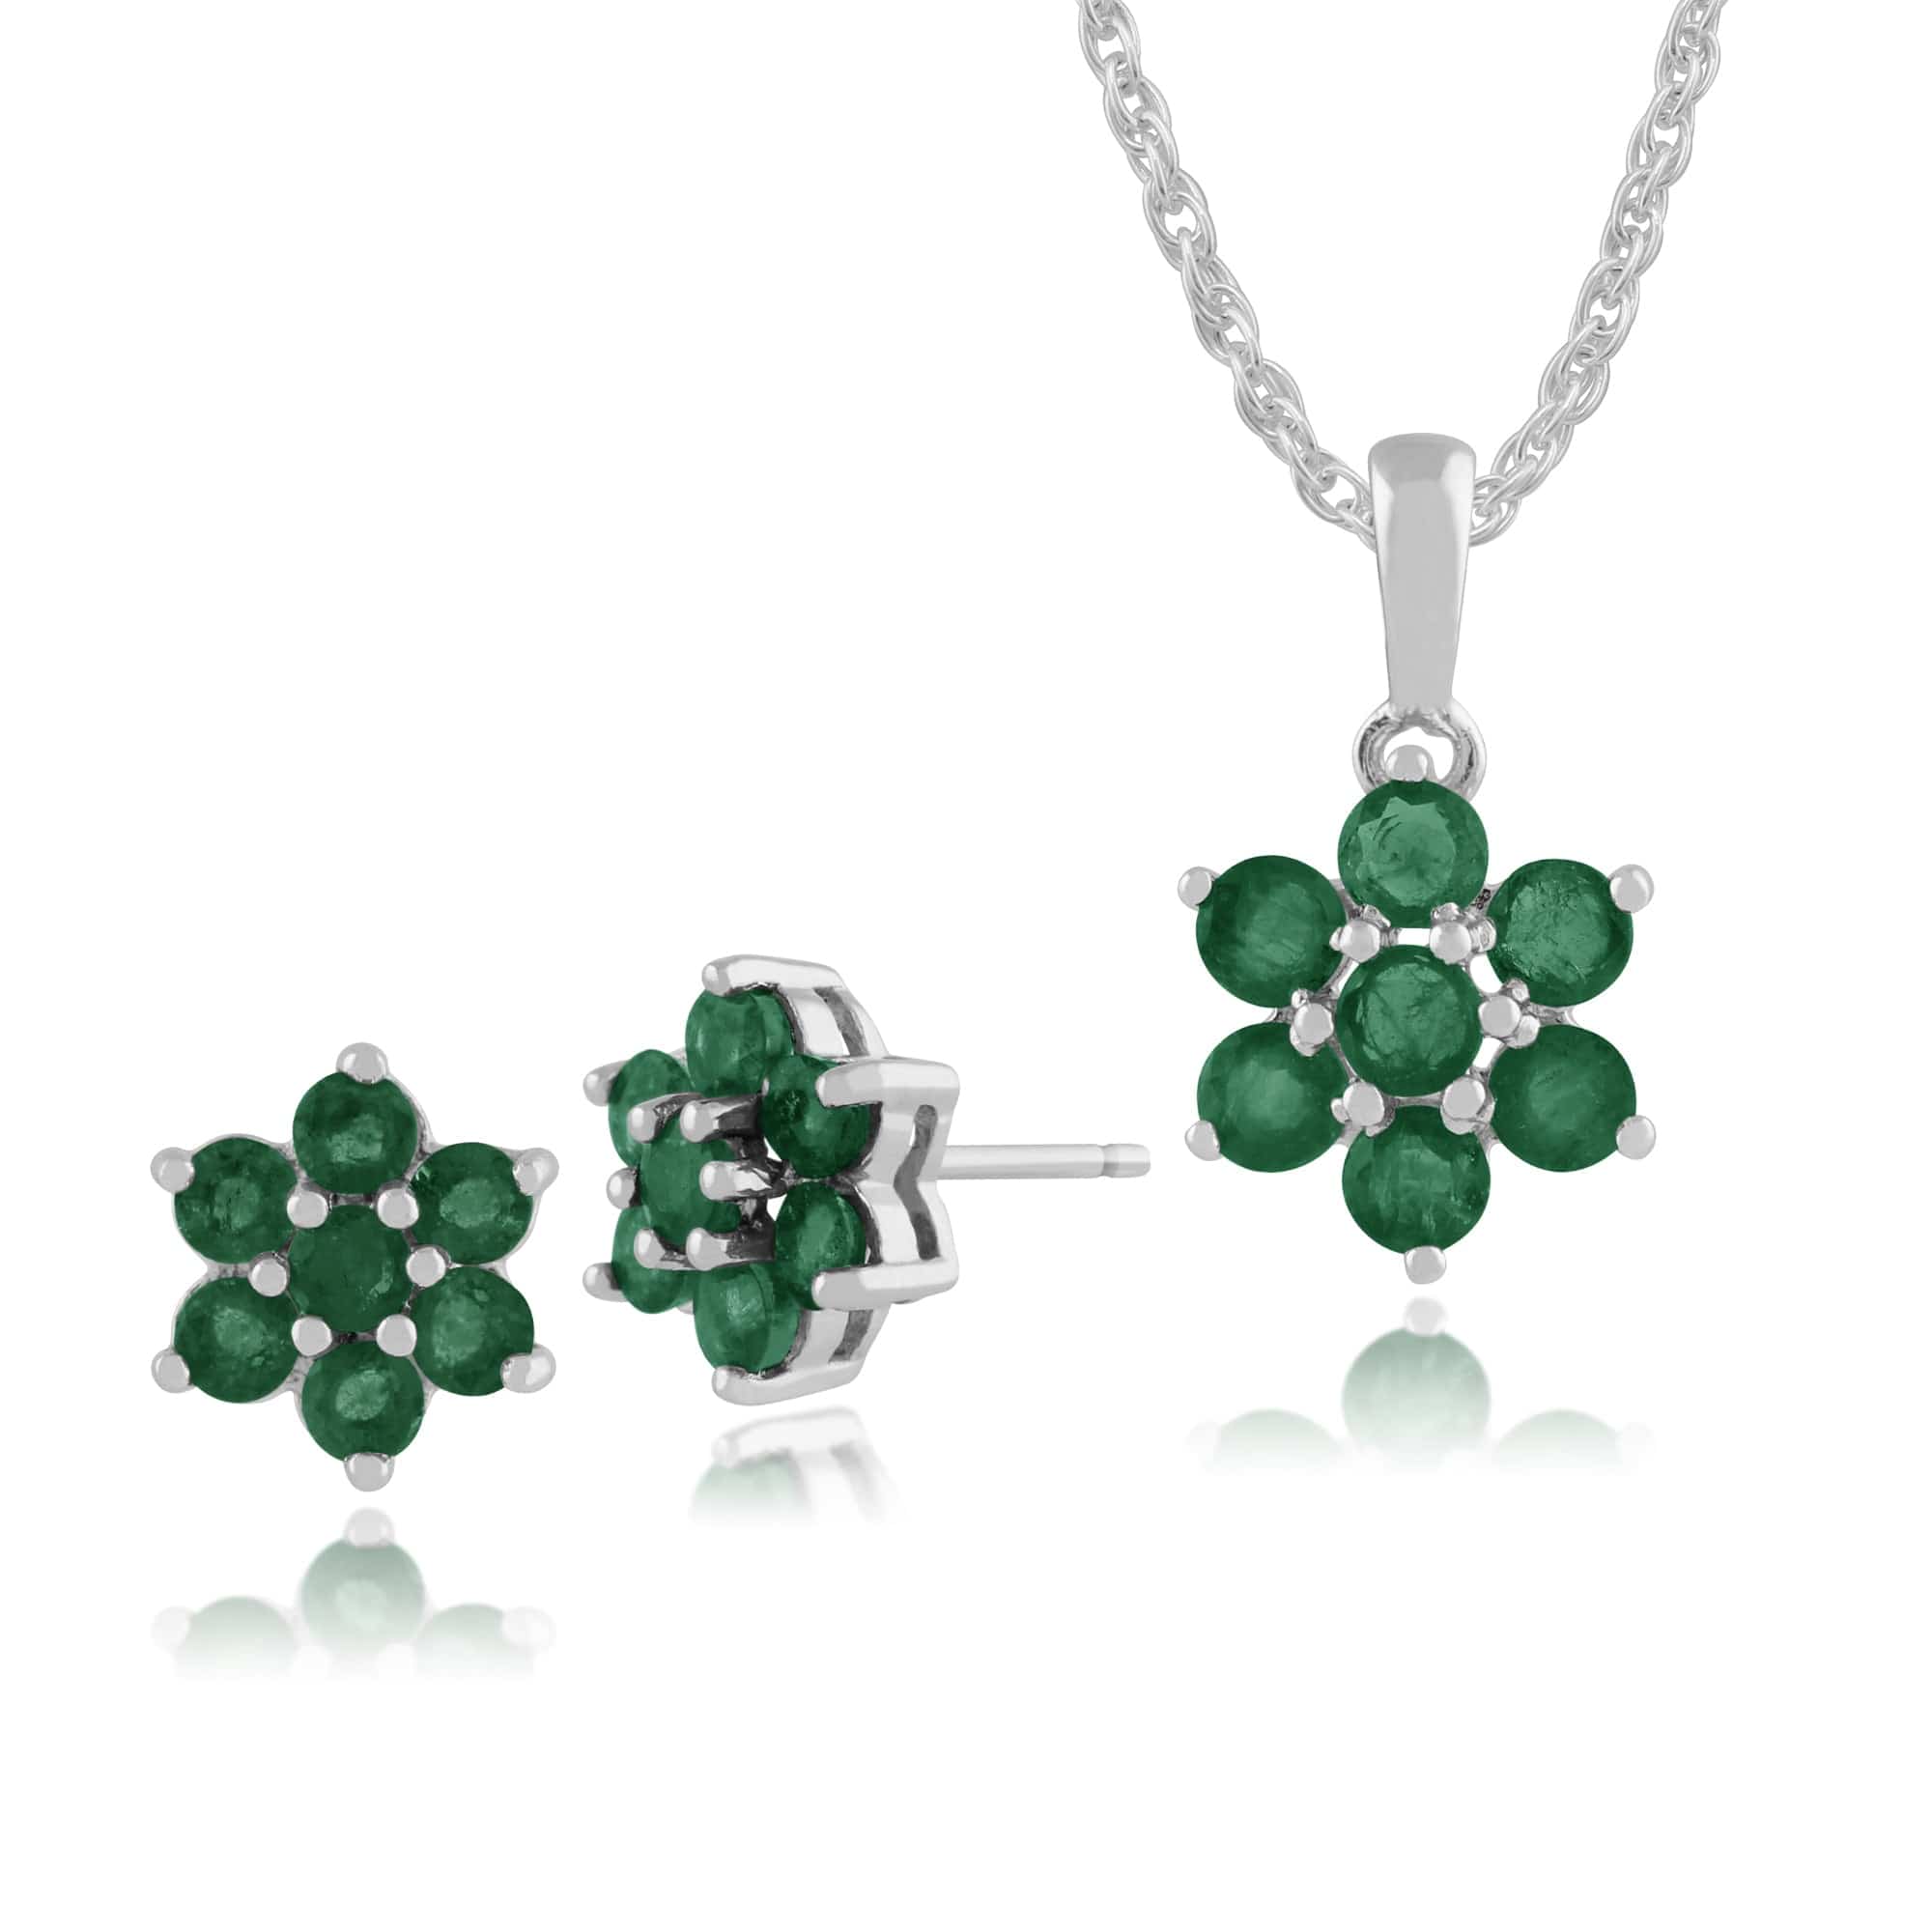 270E014009925-270P0169089 Floral Round Emerald Flower Cluster Stud Earrings & Pendant Set in 925 Sterling Silver 1